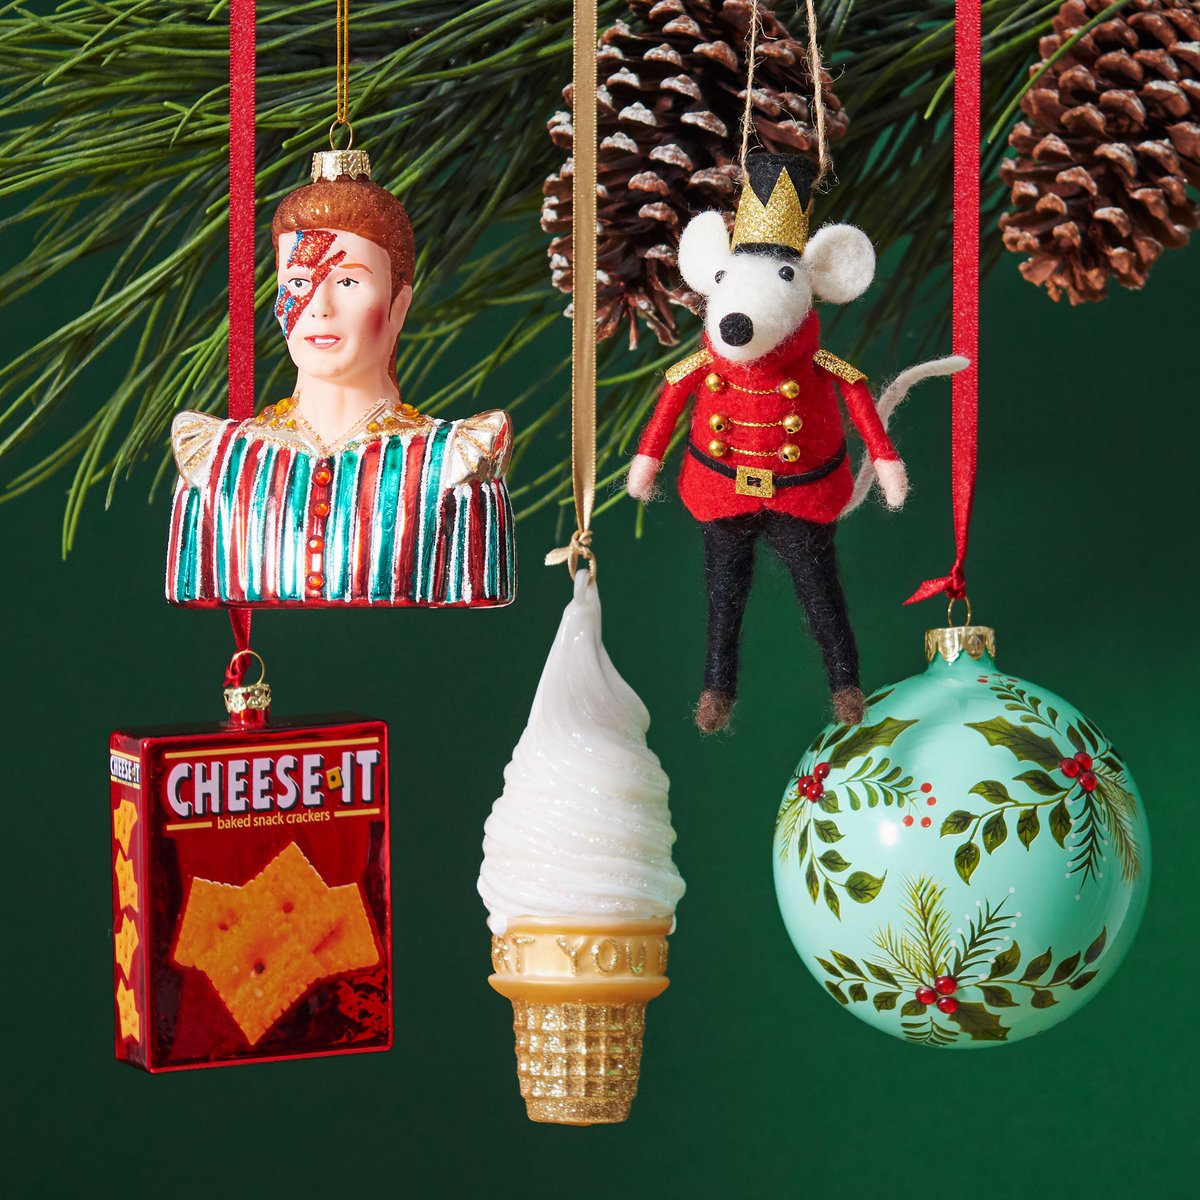 'Some Christmas tree ornaments do more than glitter and glow, they represent a gift of love given a long time ago.' — Tom Baker #papersource #christmas #holidays #shopping #ornaments #christmasornaments #uniquegifts #gifts #cuteornaments #uniqueornaments #christmastree